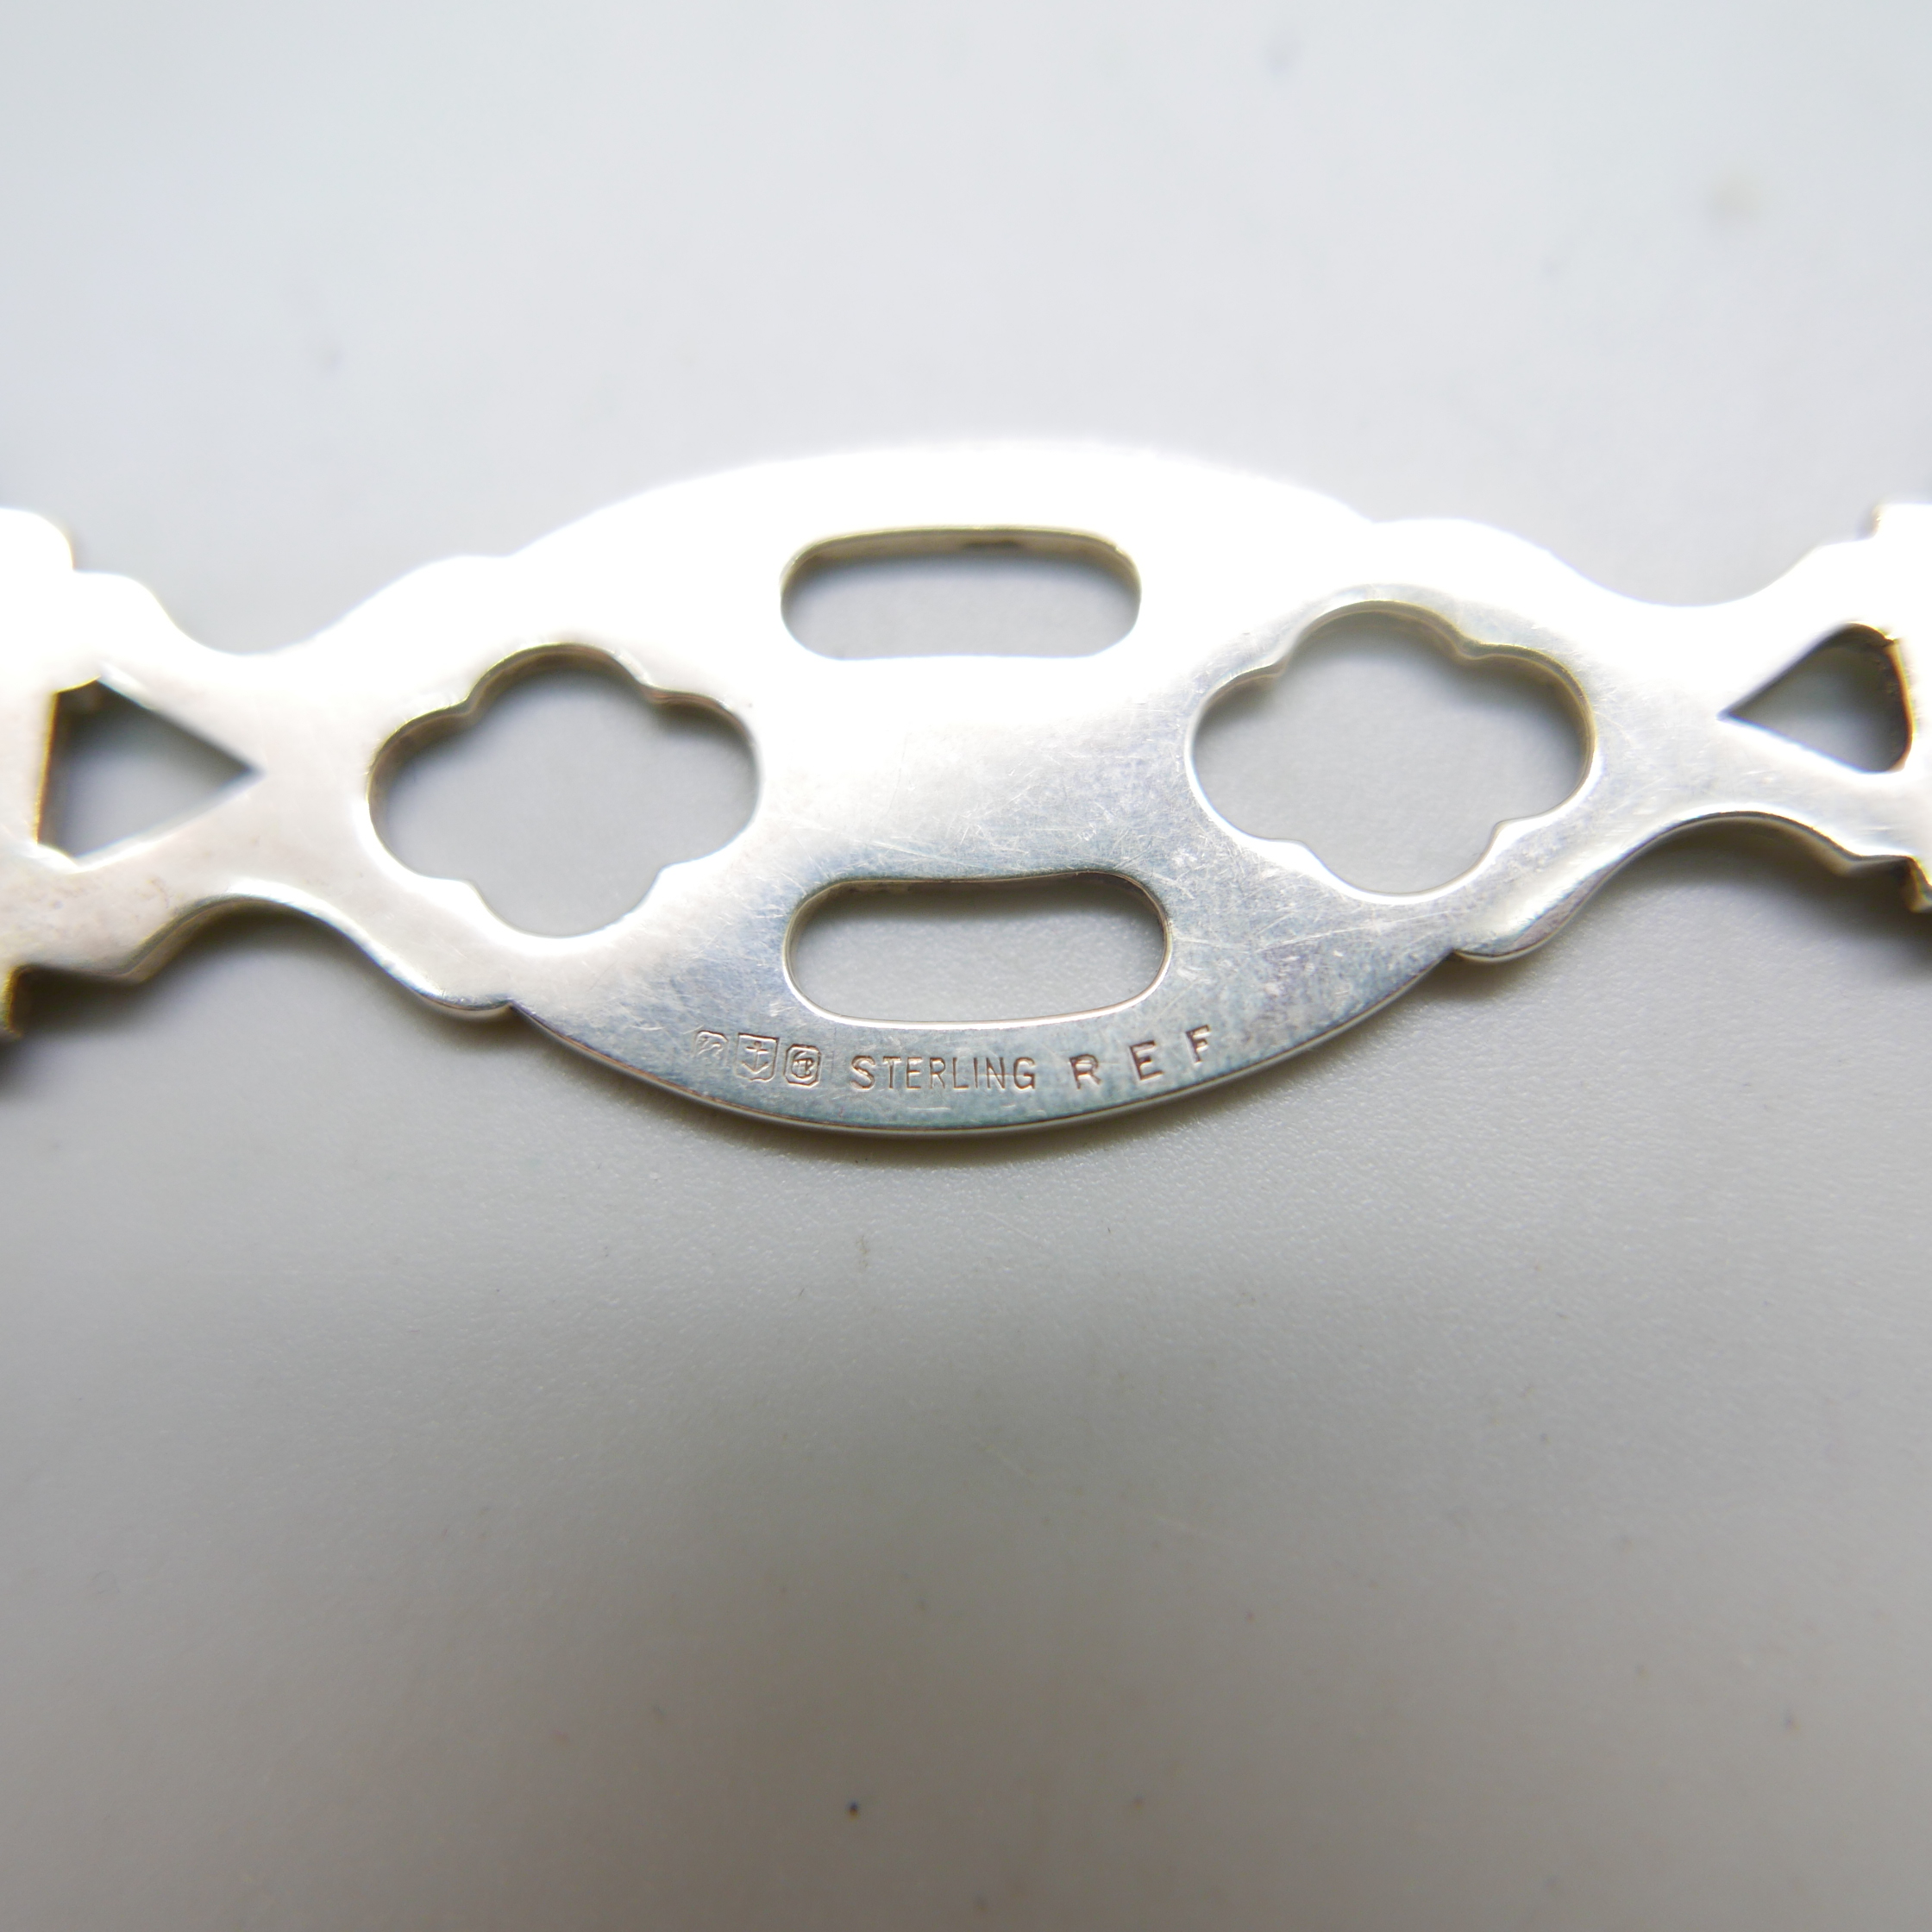 A sterling silver folding medicine spoon, 40g, length 17cm open - Image 3 of 5